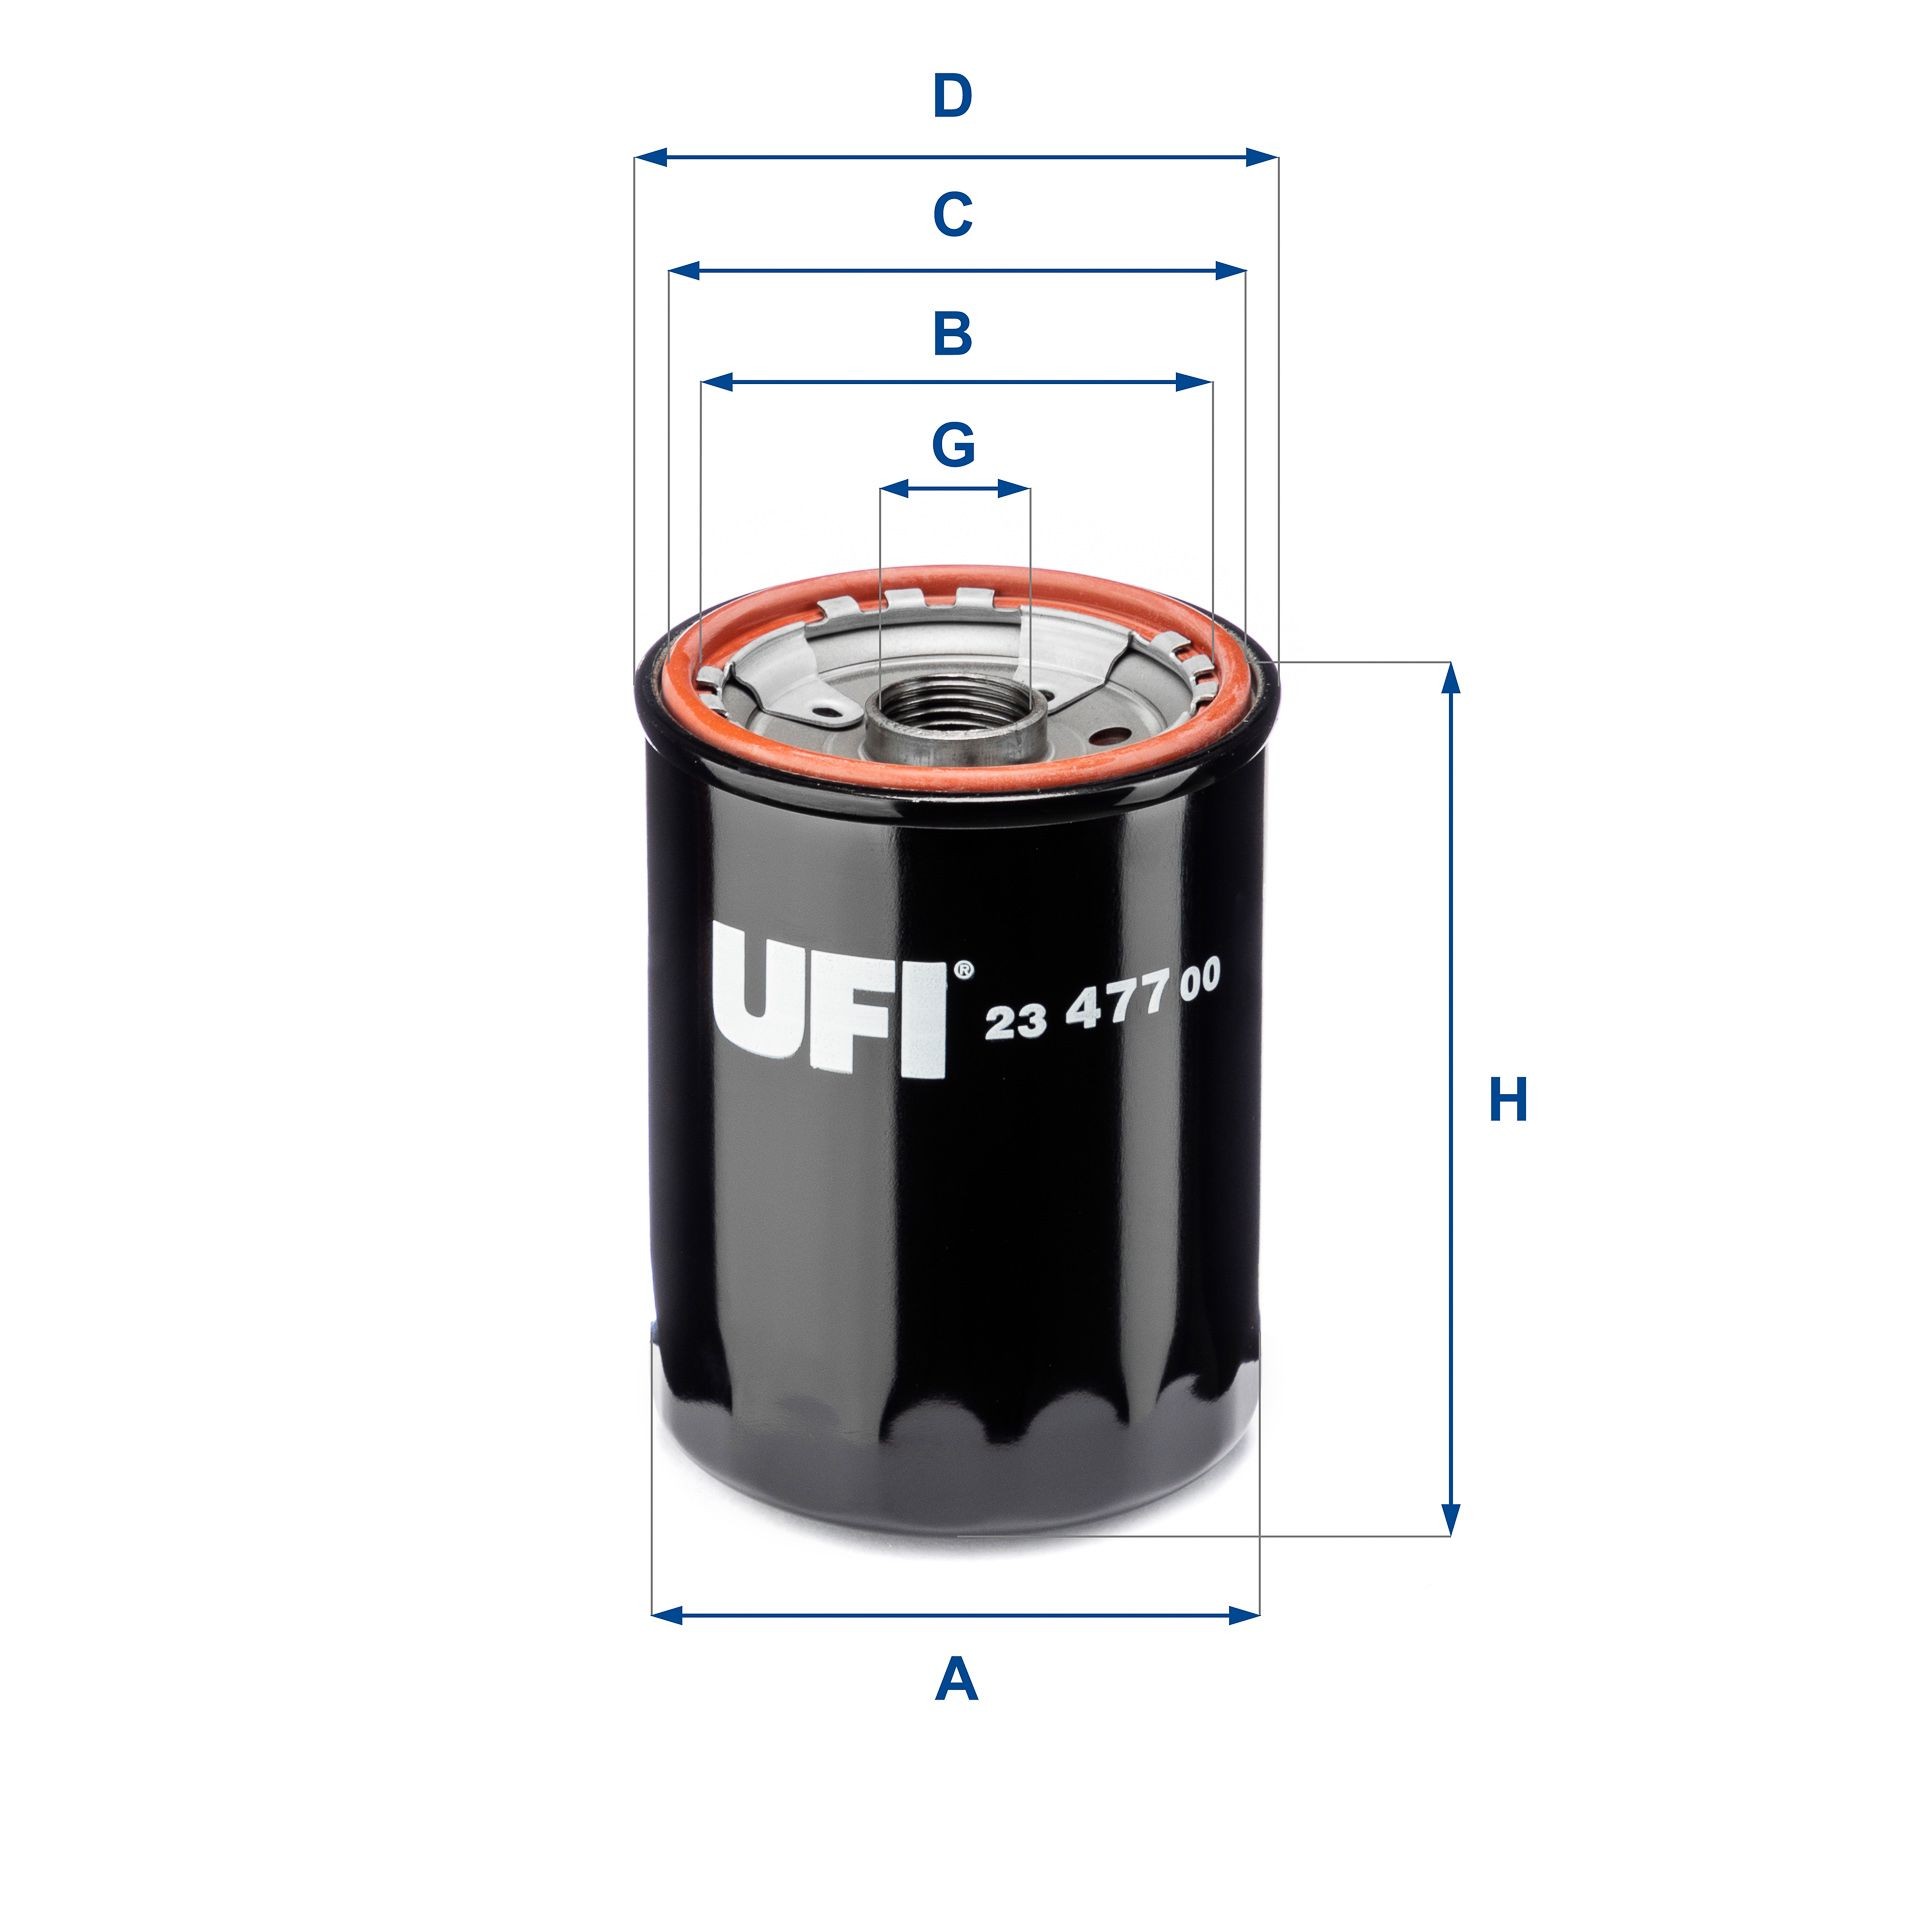 23.477.00 UFI Oil filters DAIHATSU 3/4-16 UNF, with one anti-return valve, Spin-on Filter